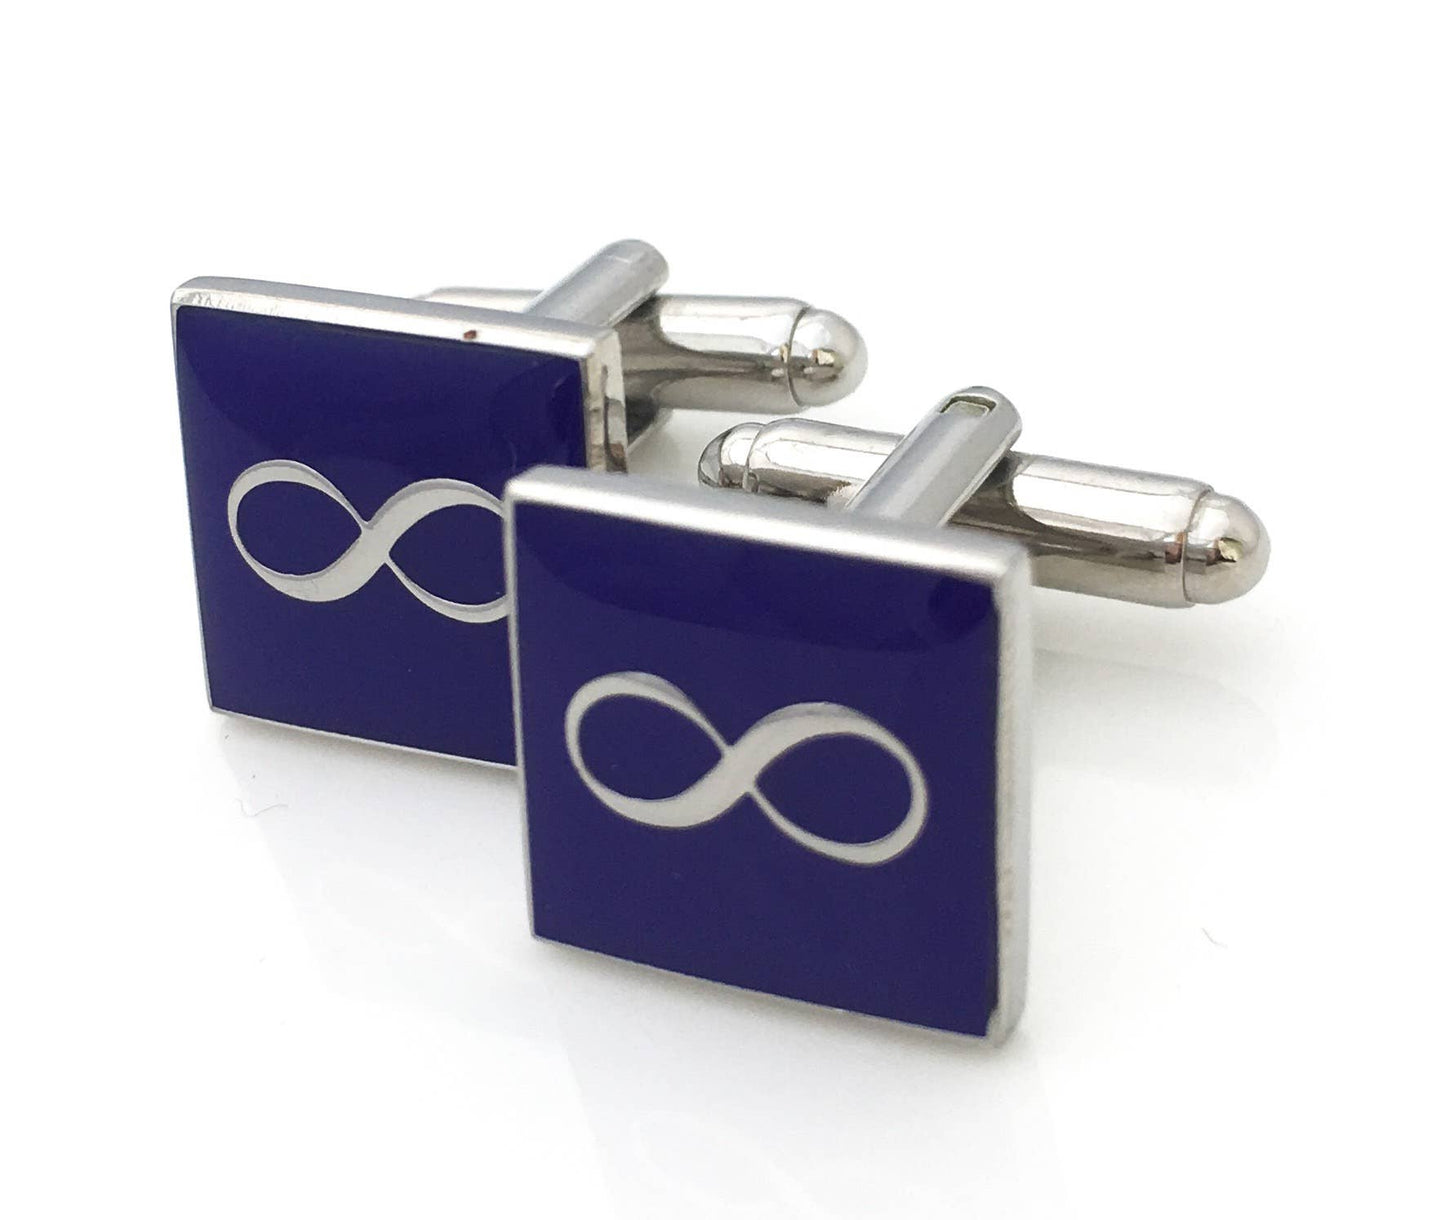 Small square cufflinks with a gold infinity symbol on a purple enamel